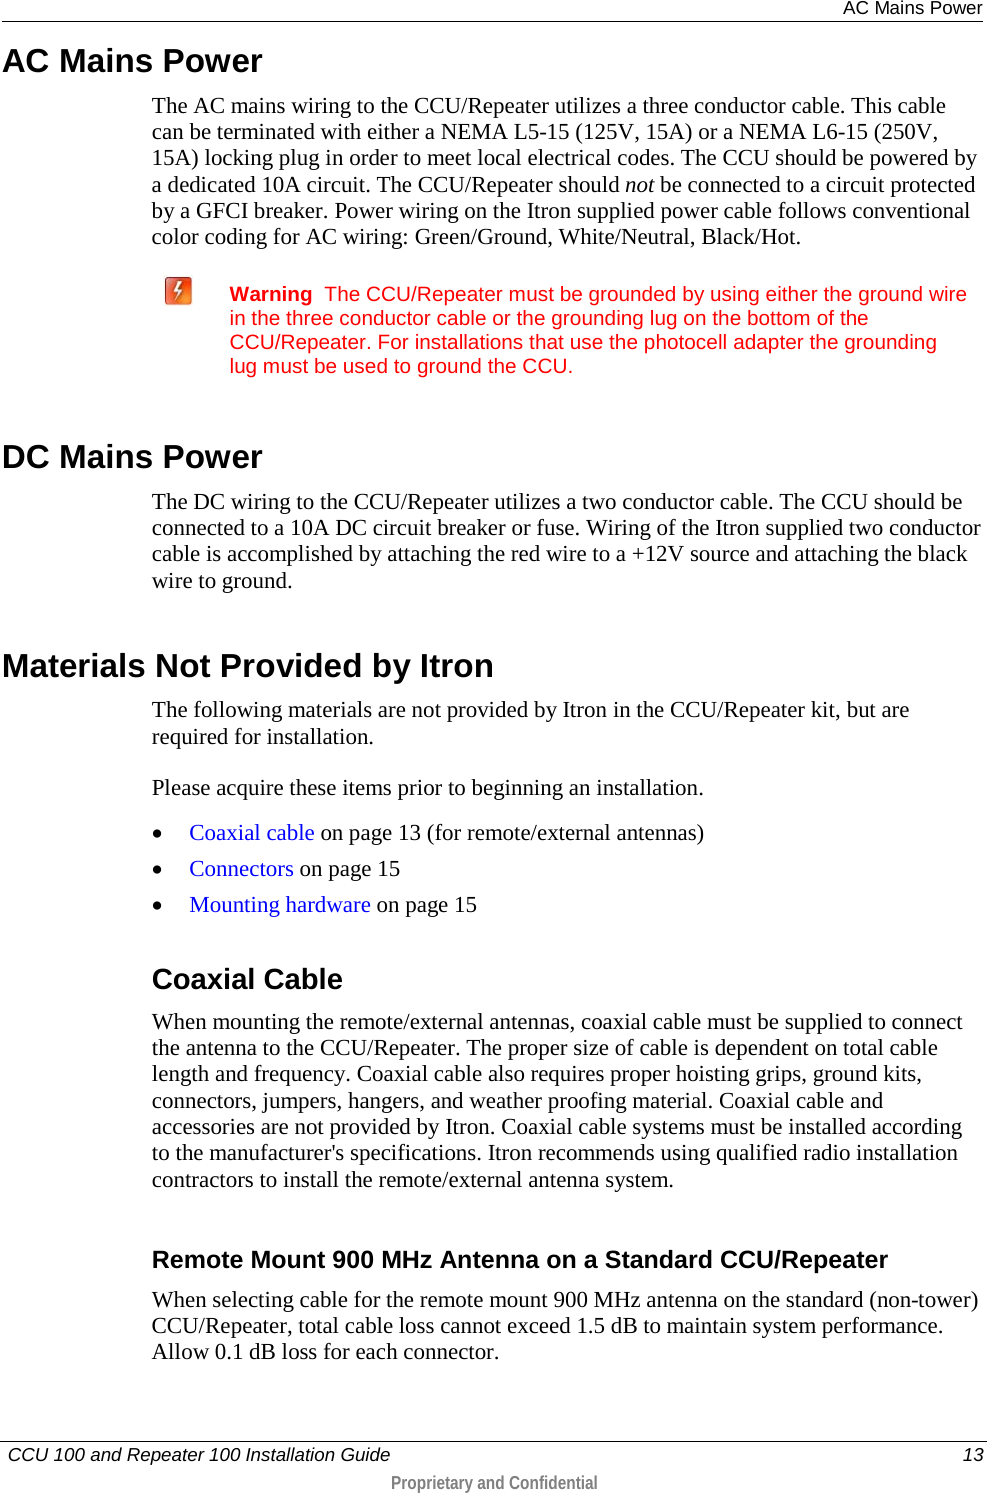  AC Mains Power   CCU 100 and Repeater 100 Installation Guide    13  Proprietary and Confidential  AC Mains Power The AC mains wiring to the CCU/Repeater utilizes a three conductor cable. This cable can be terminated with either a NEMA L5-15 (125V, 15A) or a NEMA L6-15 (250V, 15A) locking plug in order to meet local electrical codes. The CCU should be powered by a dedicated 10A circuit. The CCU/Repeater should not be connected to a circuit protected by a GFCI breaker. Power wiring on the Itron supplied power cable follows conventional color coding for AC wiring: Green/Ground, White/Neutral, Black/Hot.   Warning  The CCU/Repeater must be grounded by using either the ground wire in the three conductor cable or the grounding lug on the bottom of the CCU/Repeater. For installations that use the photocell adapter the grounding lug must be used to ground the CCU.   DC Mains Power The DC wiring to the CCU/Repeater utilizes a two conductor cable. The CCU should be connected to a 10A DC circuit breaker or fuse. Wiring of the Itron supplied two conductor cable is accomplished by attaching the red wire to a +12V source and attaching the black wire to ground.  Materials Not Provided by Itron The following materials are not provided by Itron in the CCU/Repeater kit, but are required for installation.  Please acquire these items prior to beginning an installation.  • Coaxial cable on page 13 (for remote/external antennas) • Connectors on page 15 • Mounting hardware on page 15  Coaxial Cable When mounting the remote/external antennas, coaxial cable must be supplied to connect the antenna to the CCU/Repeater. The proper size of cable is dependent on total cable length and frequency. Coaxial cable also requires proper hoisting grips, ground kits, connectors, jumpers, hangers, and weather proofing material. Coaxial cable and accessories are not provided by Itron. Coaxial cable systems must be installed according to the manufacturer&apos;s specifications. Itron recommends using qualified radio installation contractors to install the remote/external antenna system.   Remote Mount 900 MHz Antenna on a Standard CCU/Repeater When selecting cable for the remote mount 900 MHz antenna on the standard (non-tower) CCU/Repeater, total cable loss cannot exceed 1.5 dB to maintain system performance. Allow 0.1 dB loss for each connector.  